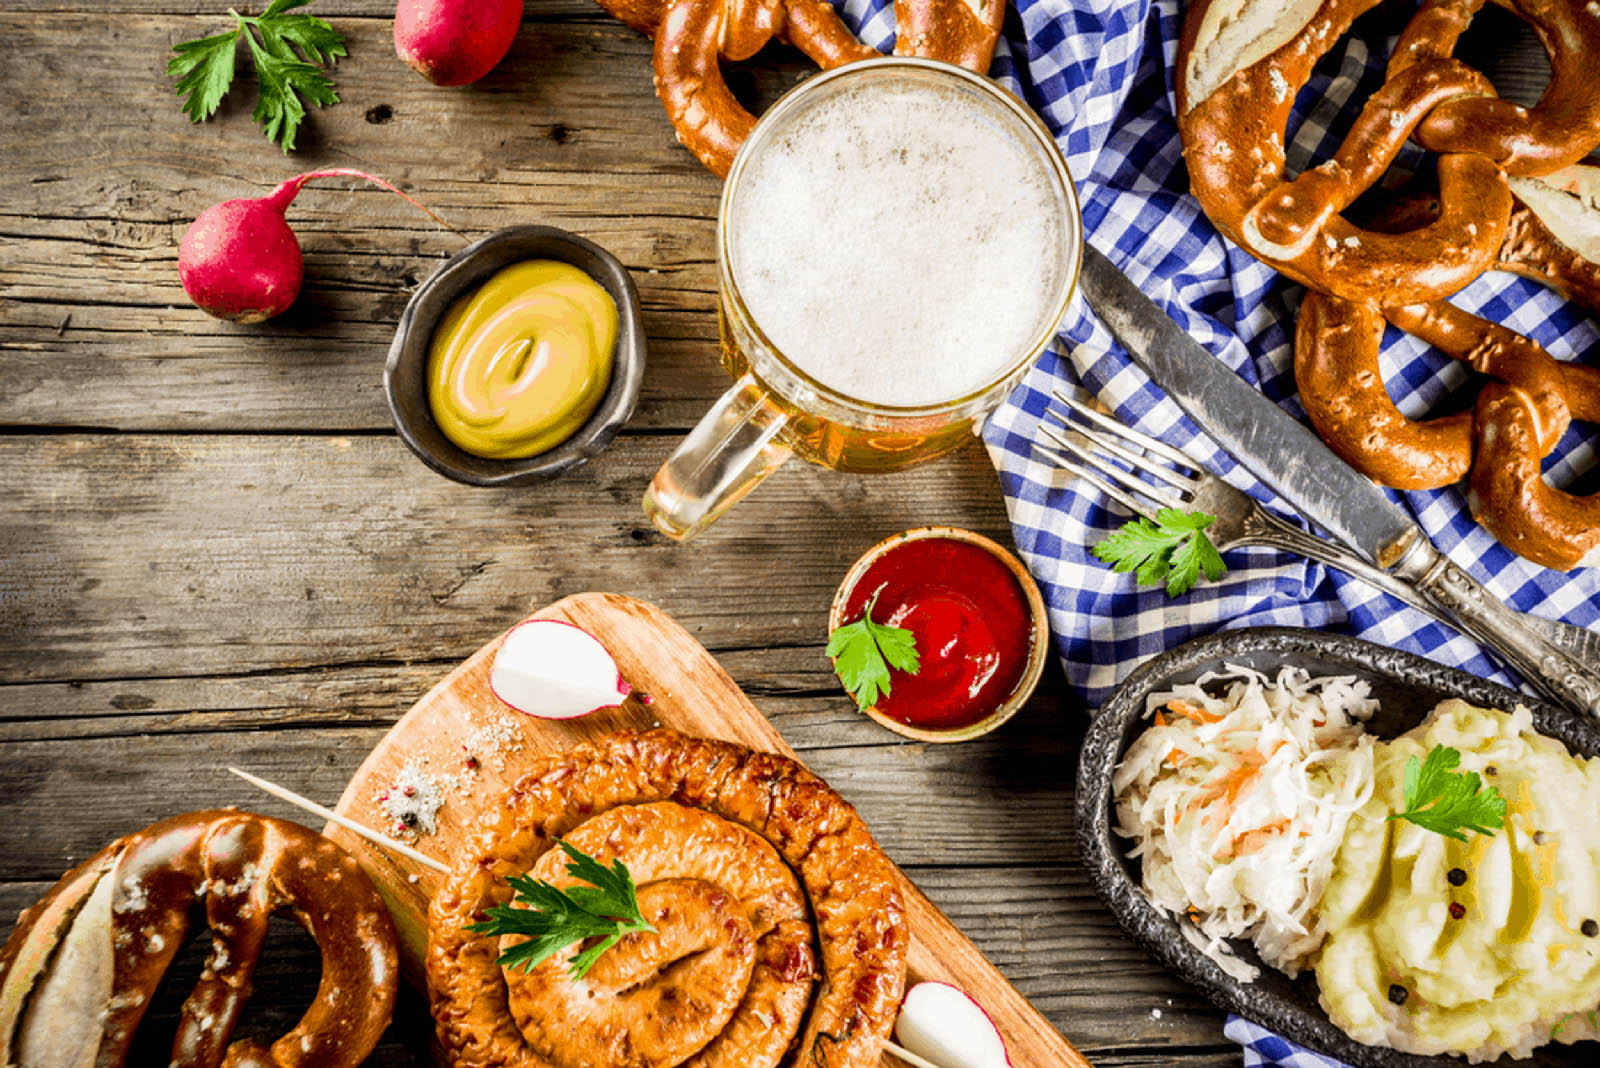 🥘 I Bet We Can Guess Your Age Based on the Food You’d Rather Eat German Food Cuisine